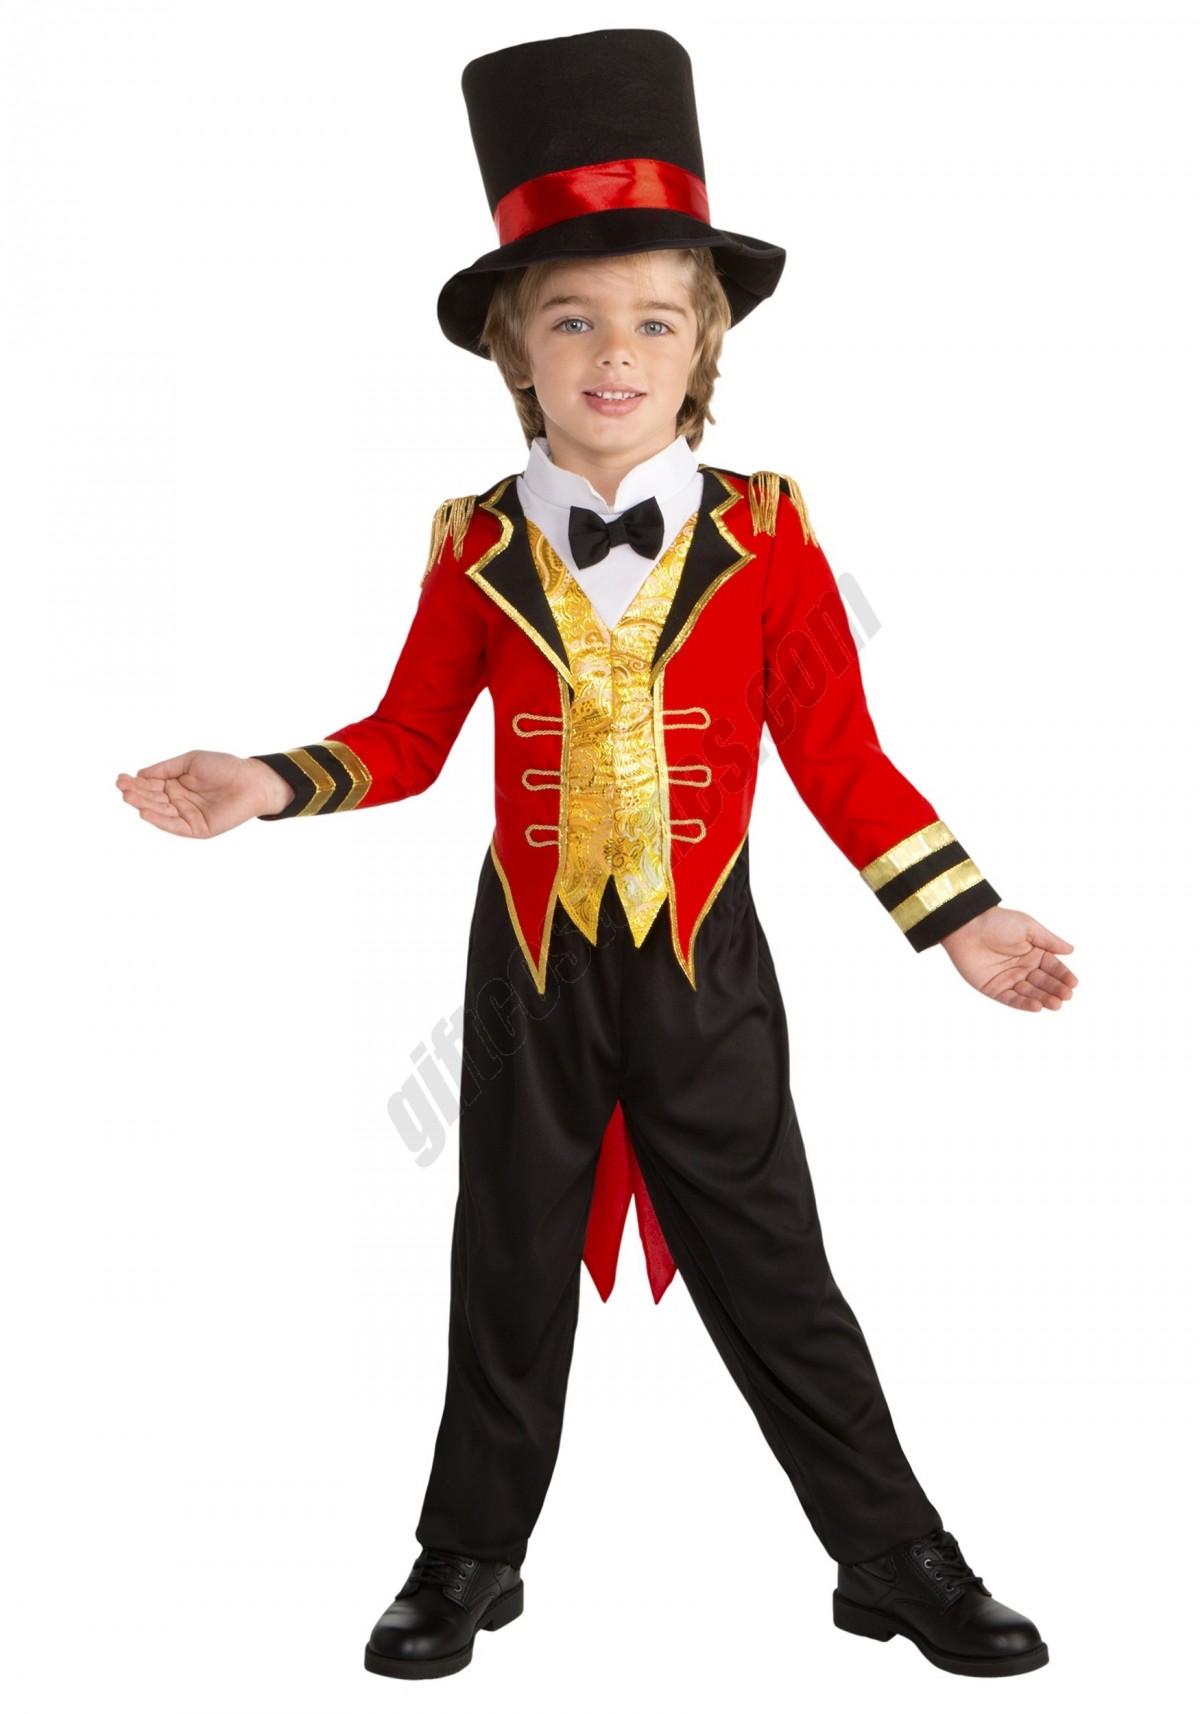 Toddler Boys Circus Leader Ringmaster Costume Promotions - -0